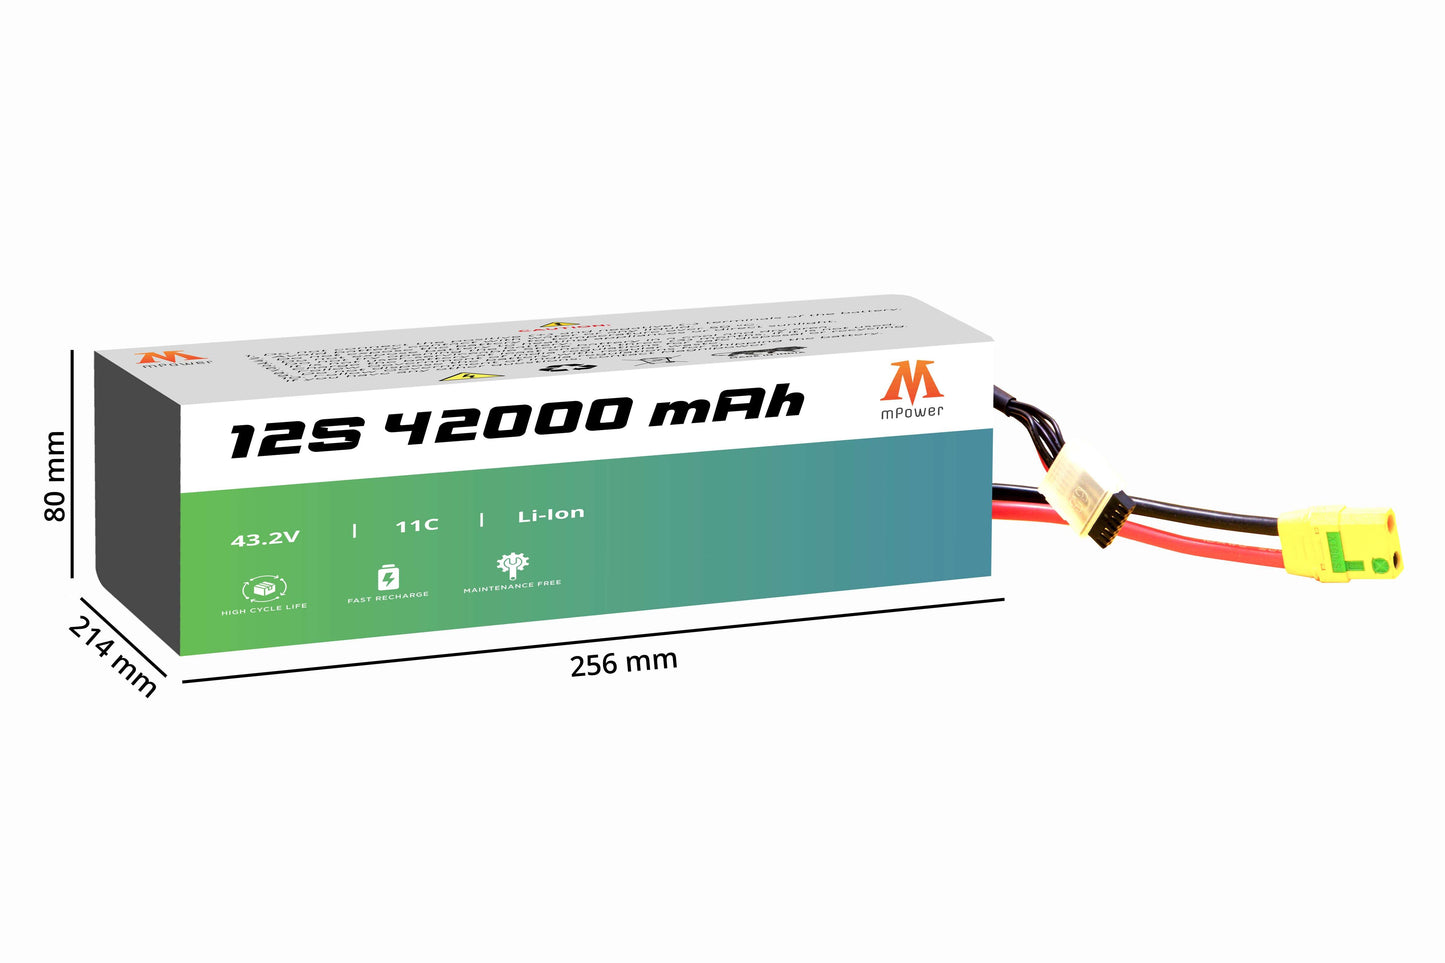 mPower 12S 42000mAh Lithium-Ion Battery for Delivery Drones